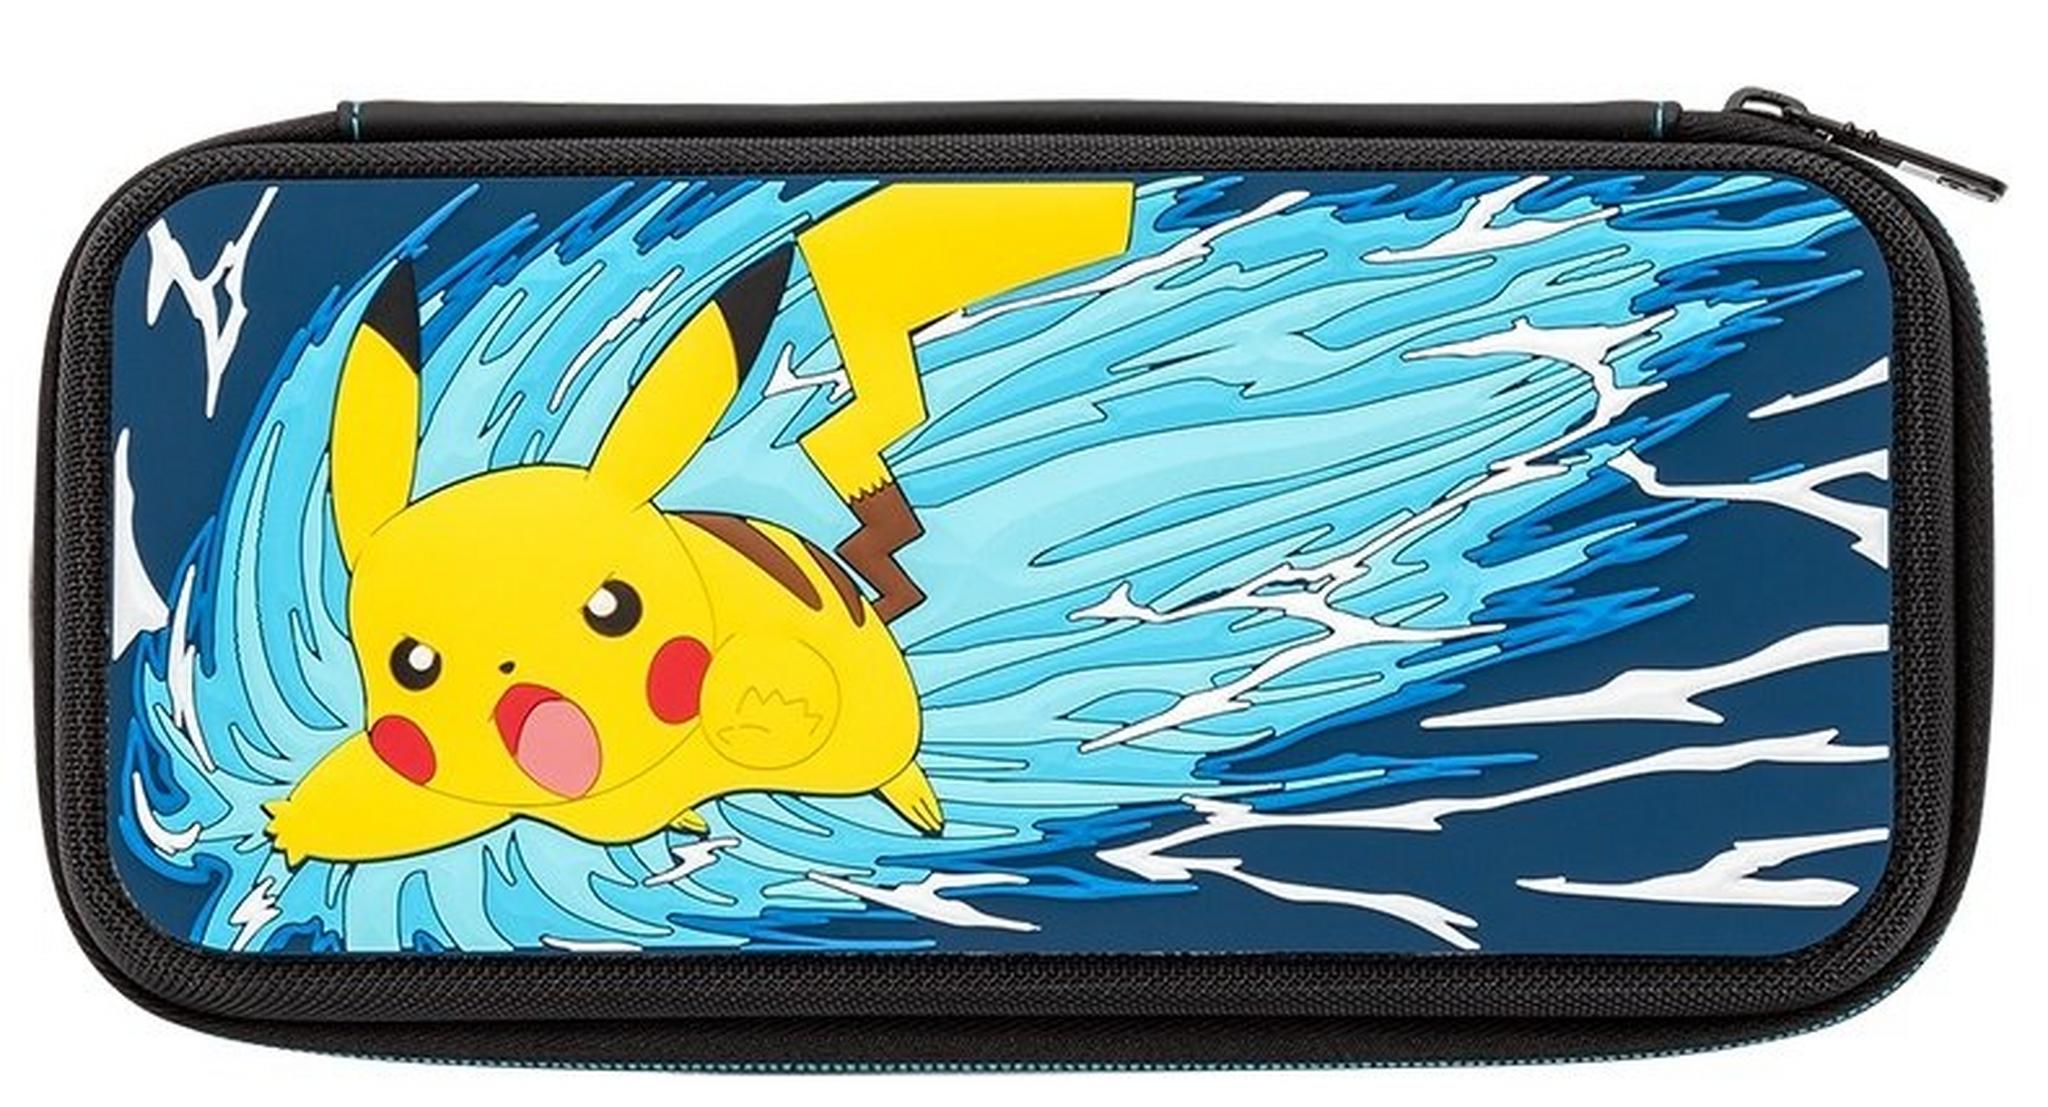 Nintendo Switch Deluxe Travel Case - Pikachu Edition